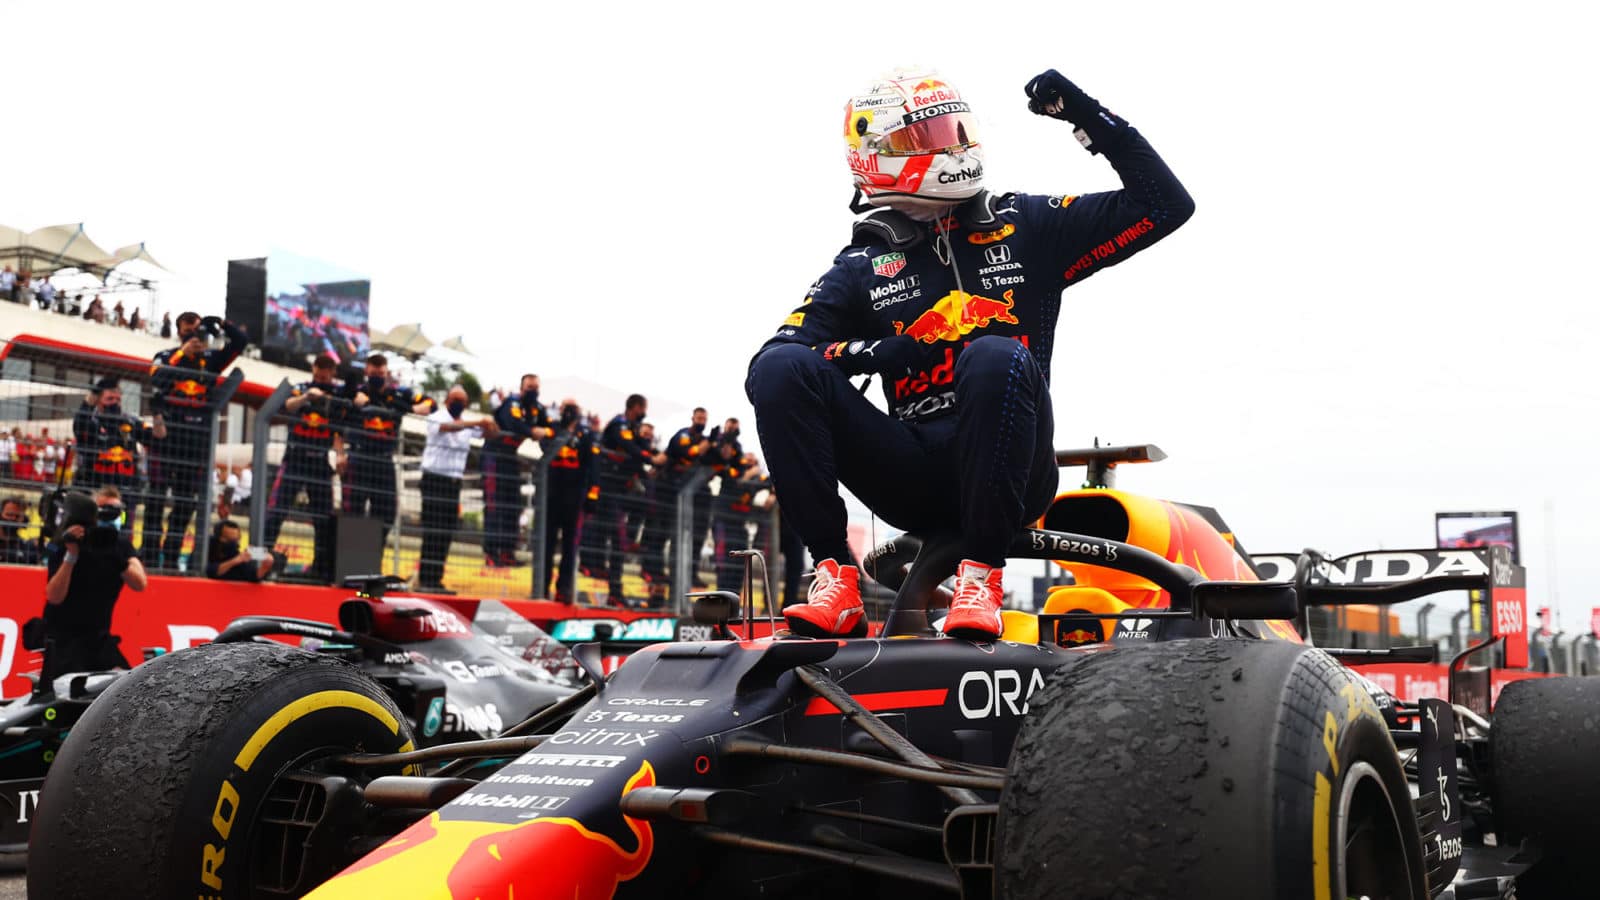 LE CASTELLET, FRANCE - JUNE 20: Race winner Max Verstappen of Netherlands and Red Bull Racing celebrates in parc ferme during the F1 Grand Prix of France at Circuit Paul Ricard on June 20, 2021 in Le Castellet, France. (Photo by Dan Istitene - Formula 1/Formula 1 via Getty Images)